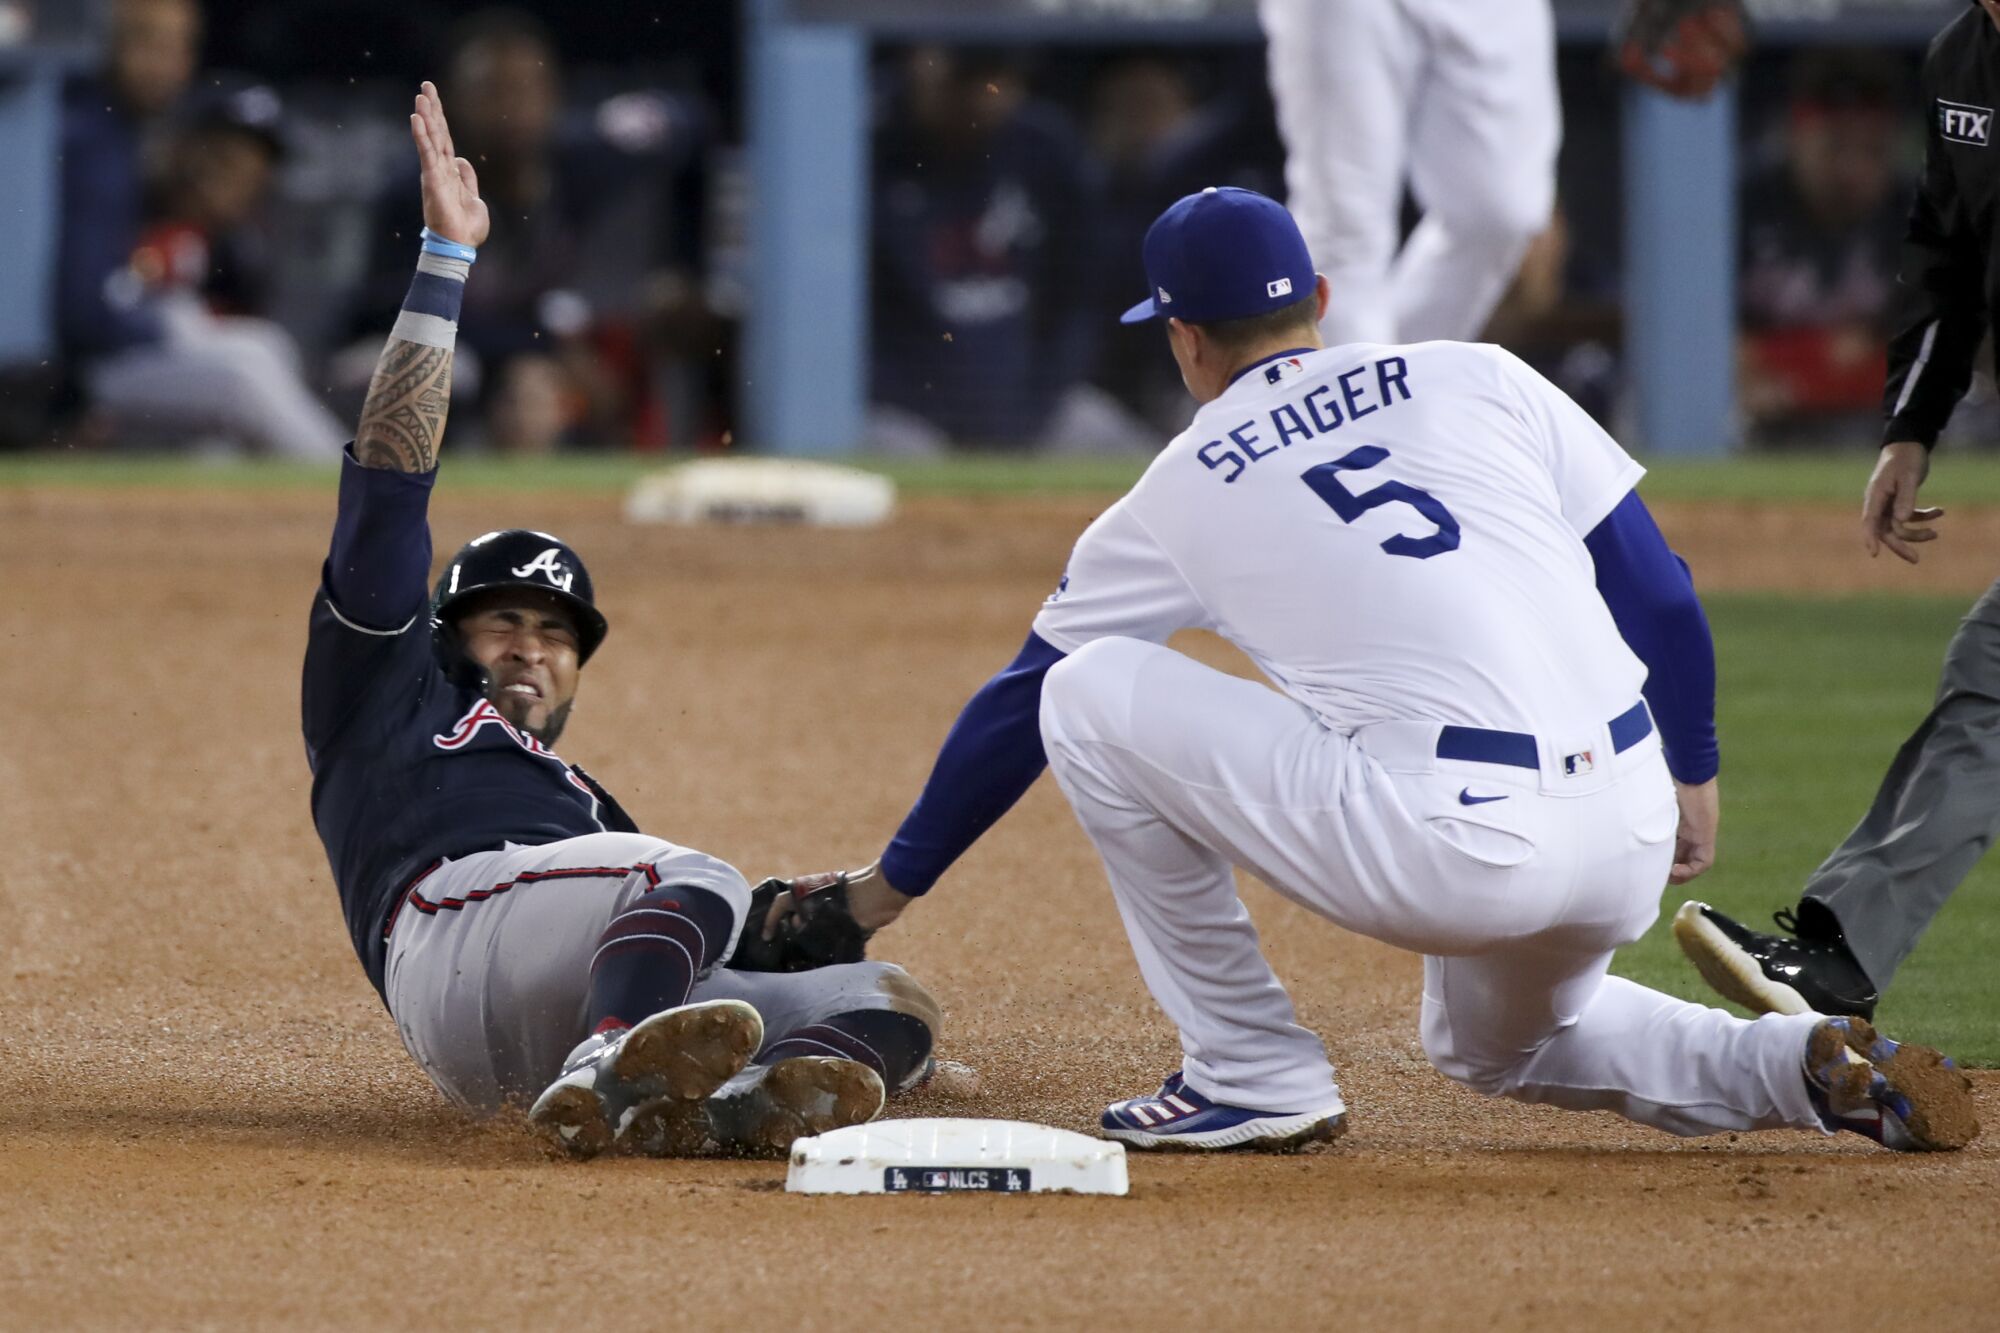  Dodgers shortstop Corey Seager, right tags out Braves' Eddie Rosario.